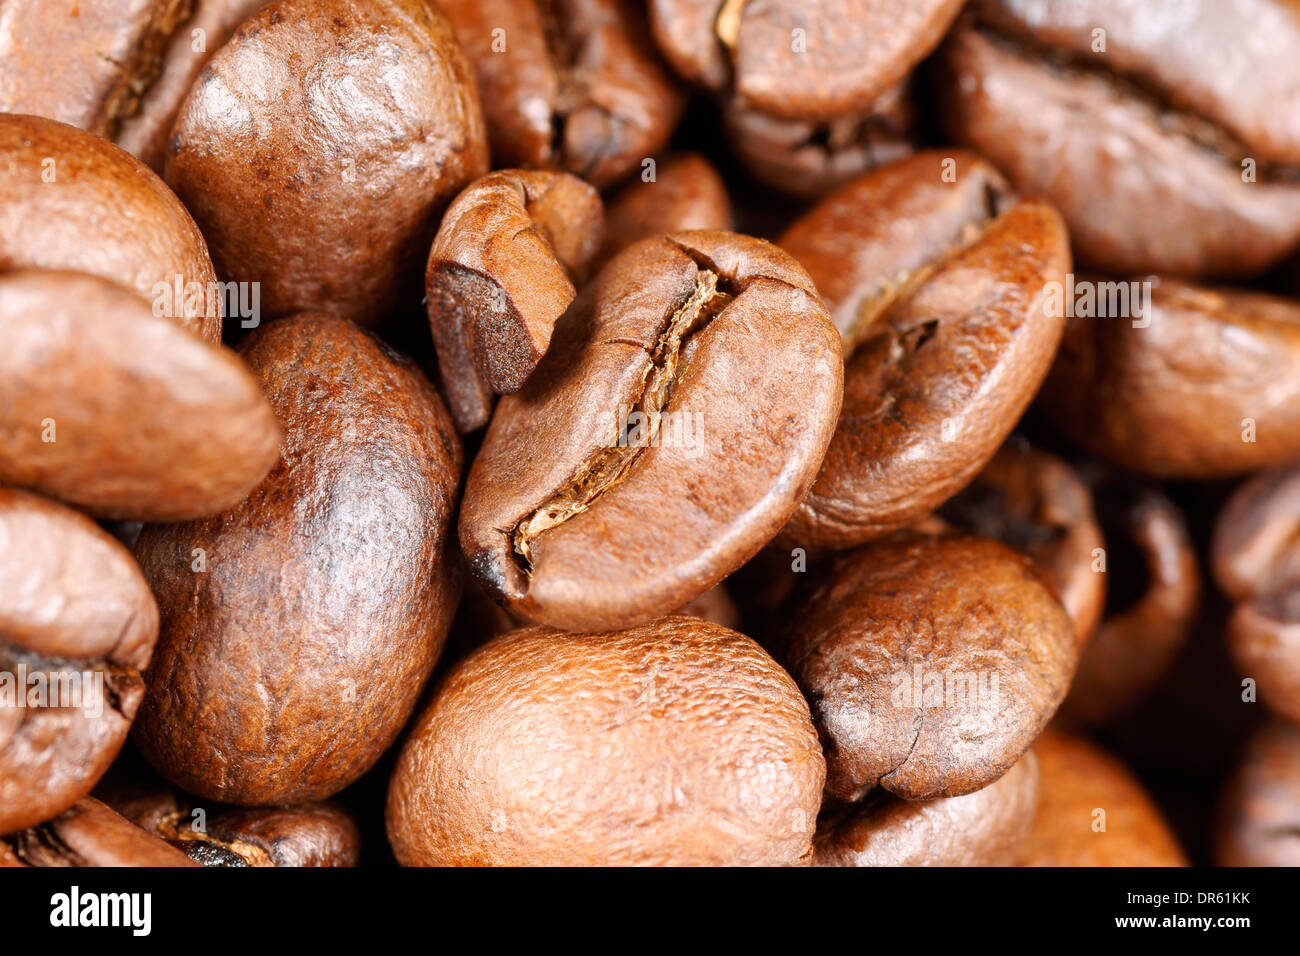 Background of roasted arabica coffee beans. Macro with shallow DOF. Stock Photo